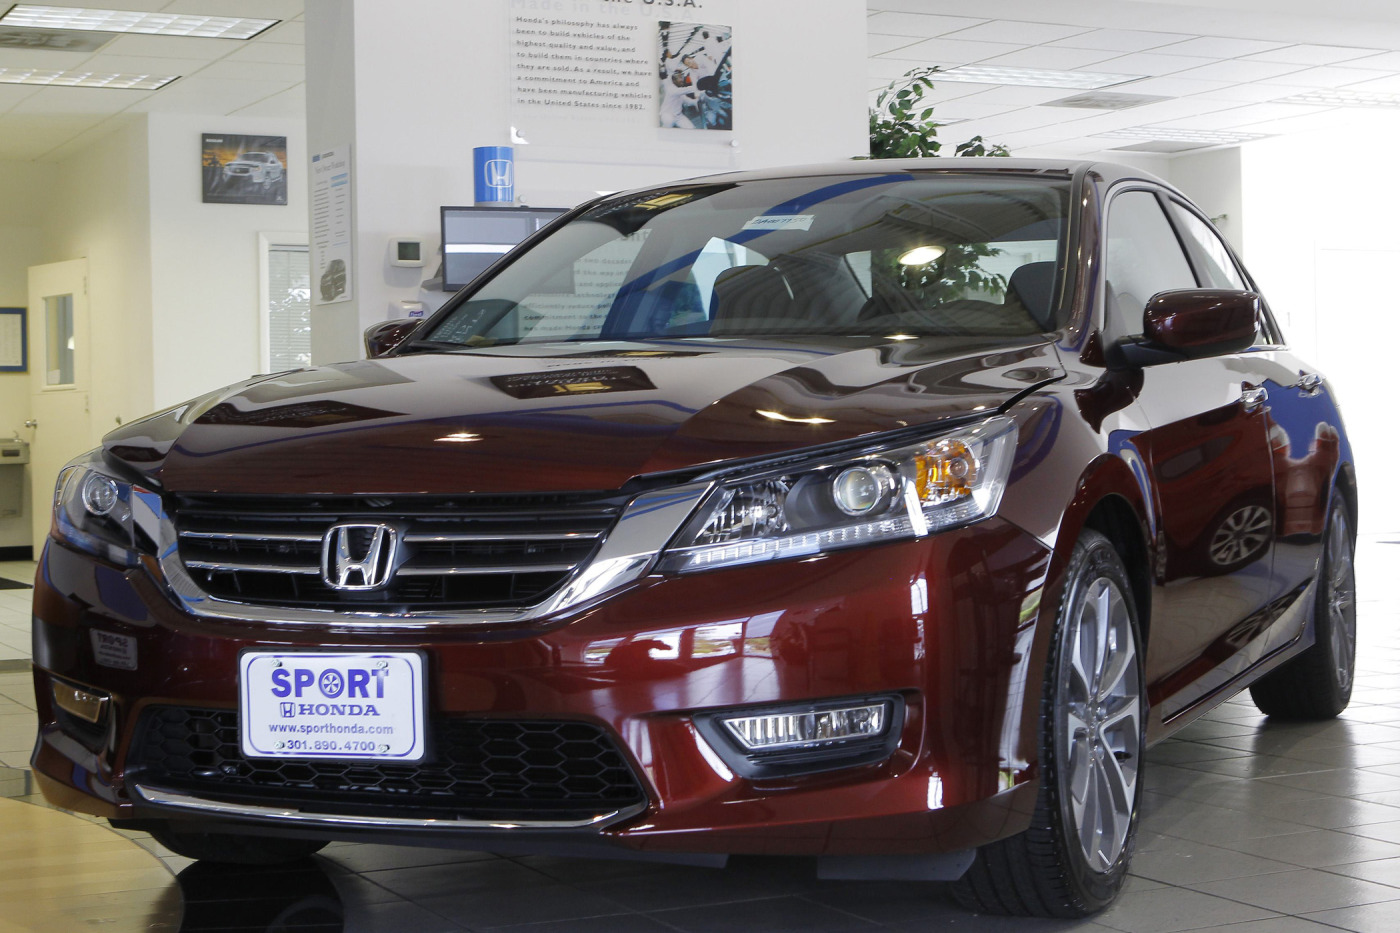 A new 2013 Honda Accord is shown on the sales floor at Sport Honda in Silver Spring, Maryland Sept. 17, 2012. 